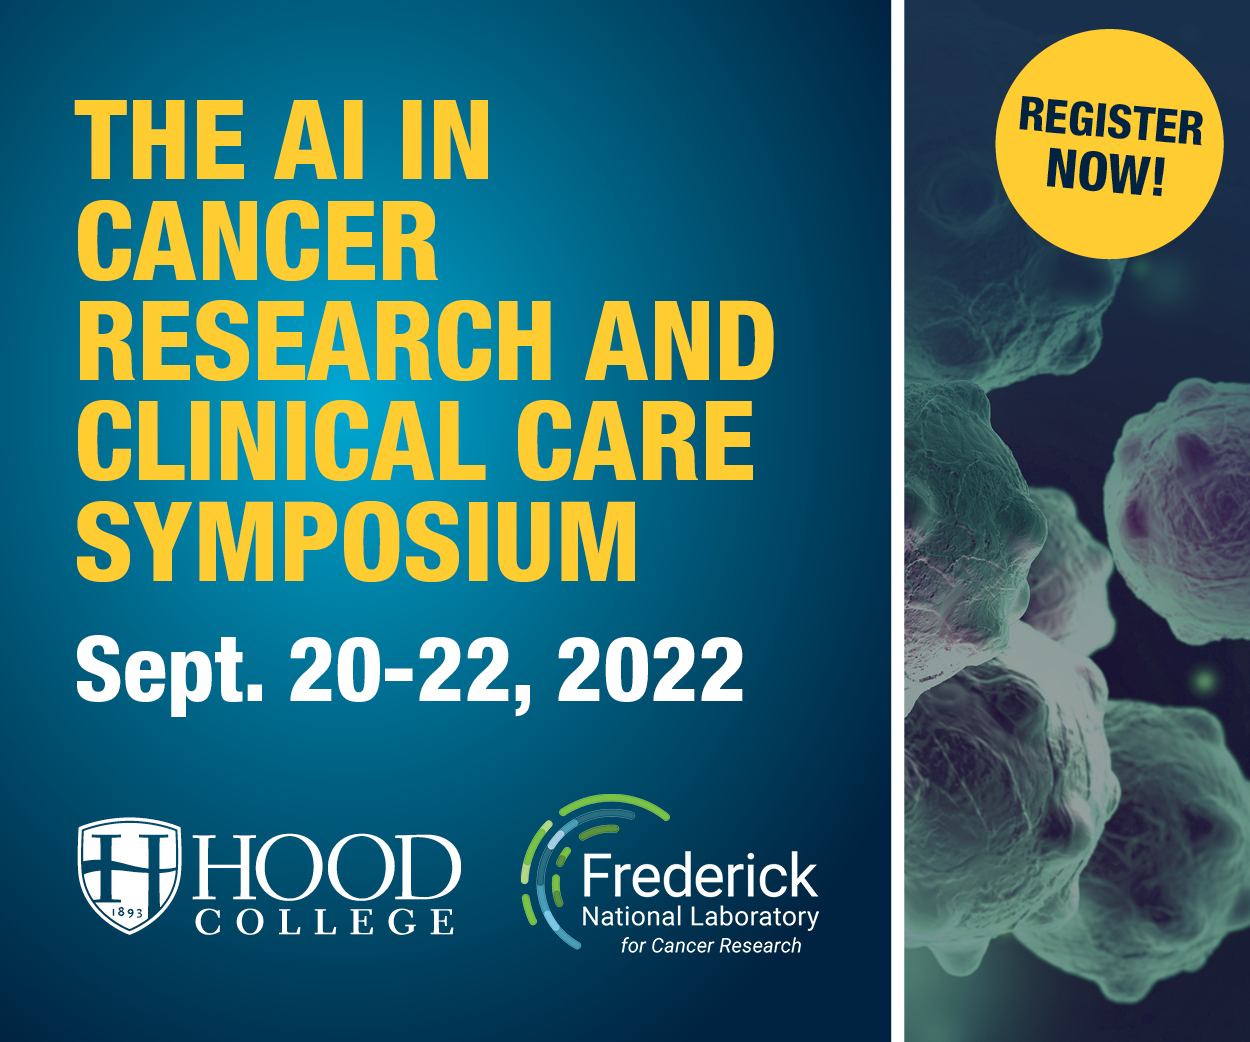 Flyer for the symposium that reads: "The AI in cancer research and clinical care symposium, september 20-22, 2022"